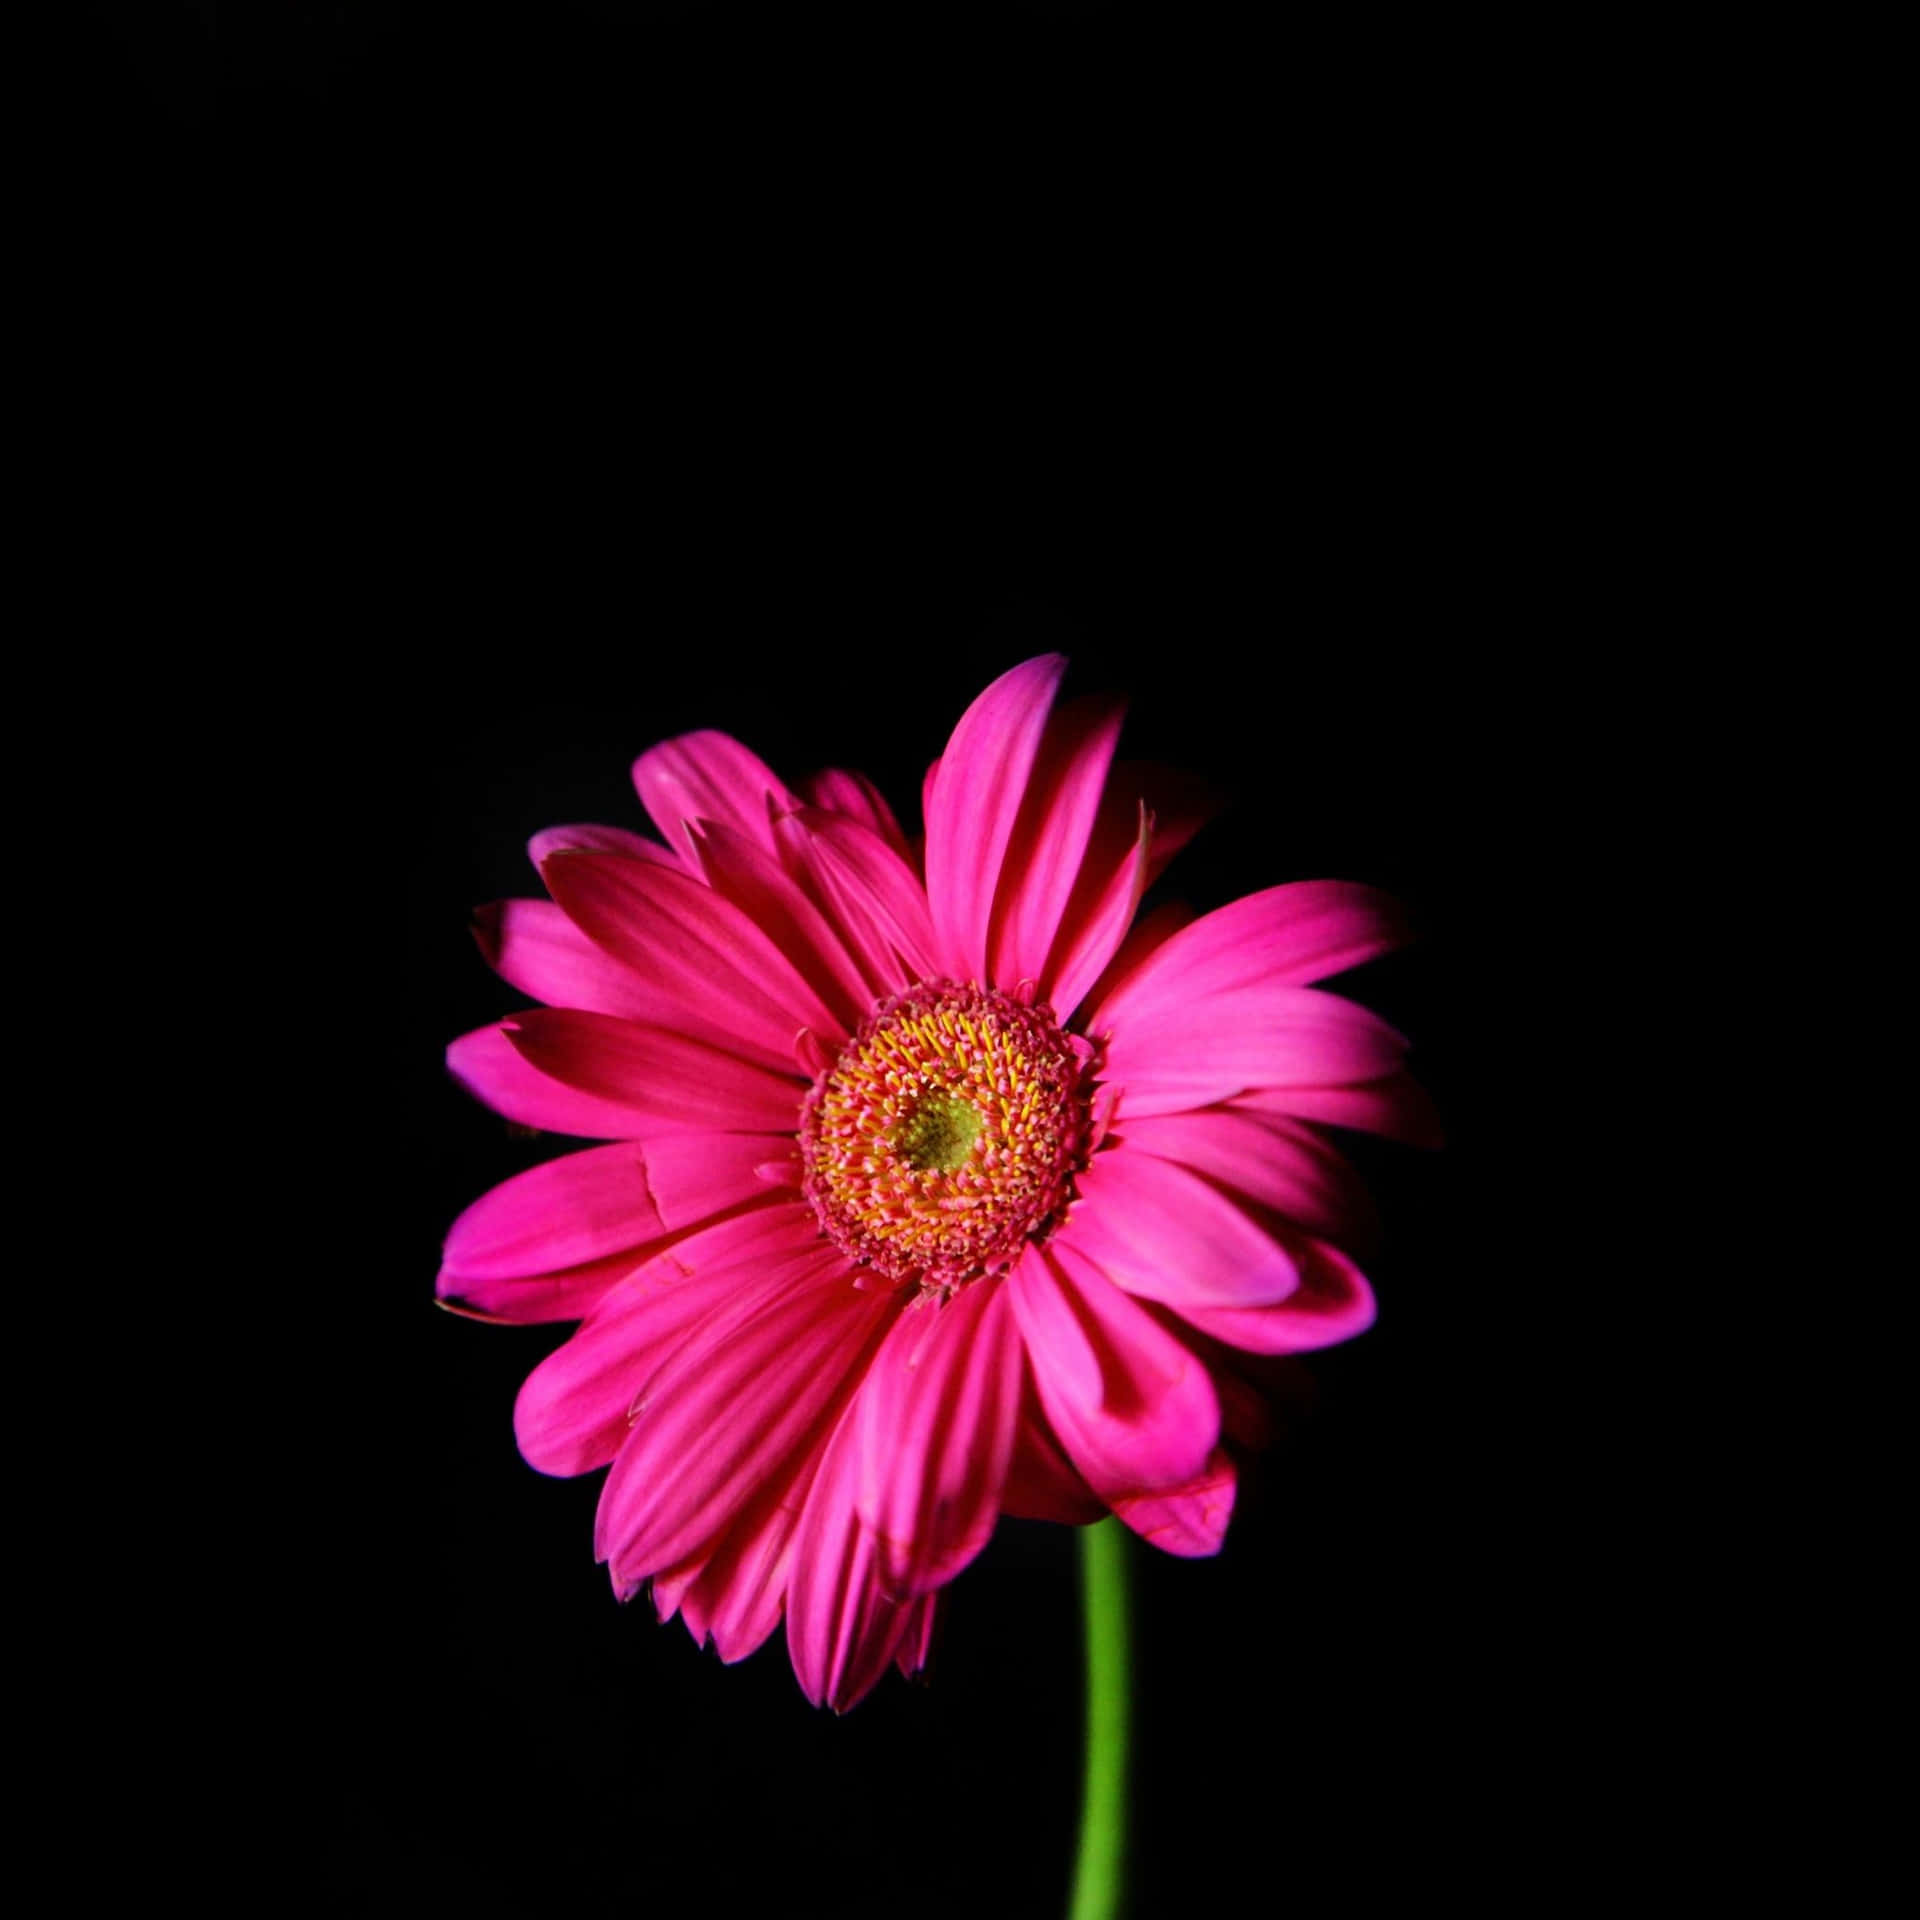 Free Black And Pink Floral Wallpaper Downloads, [100+] Black And Pink  Floral Wallpapers for FREE 